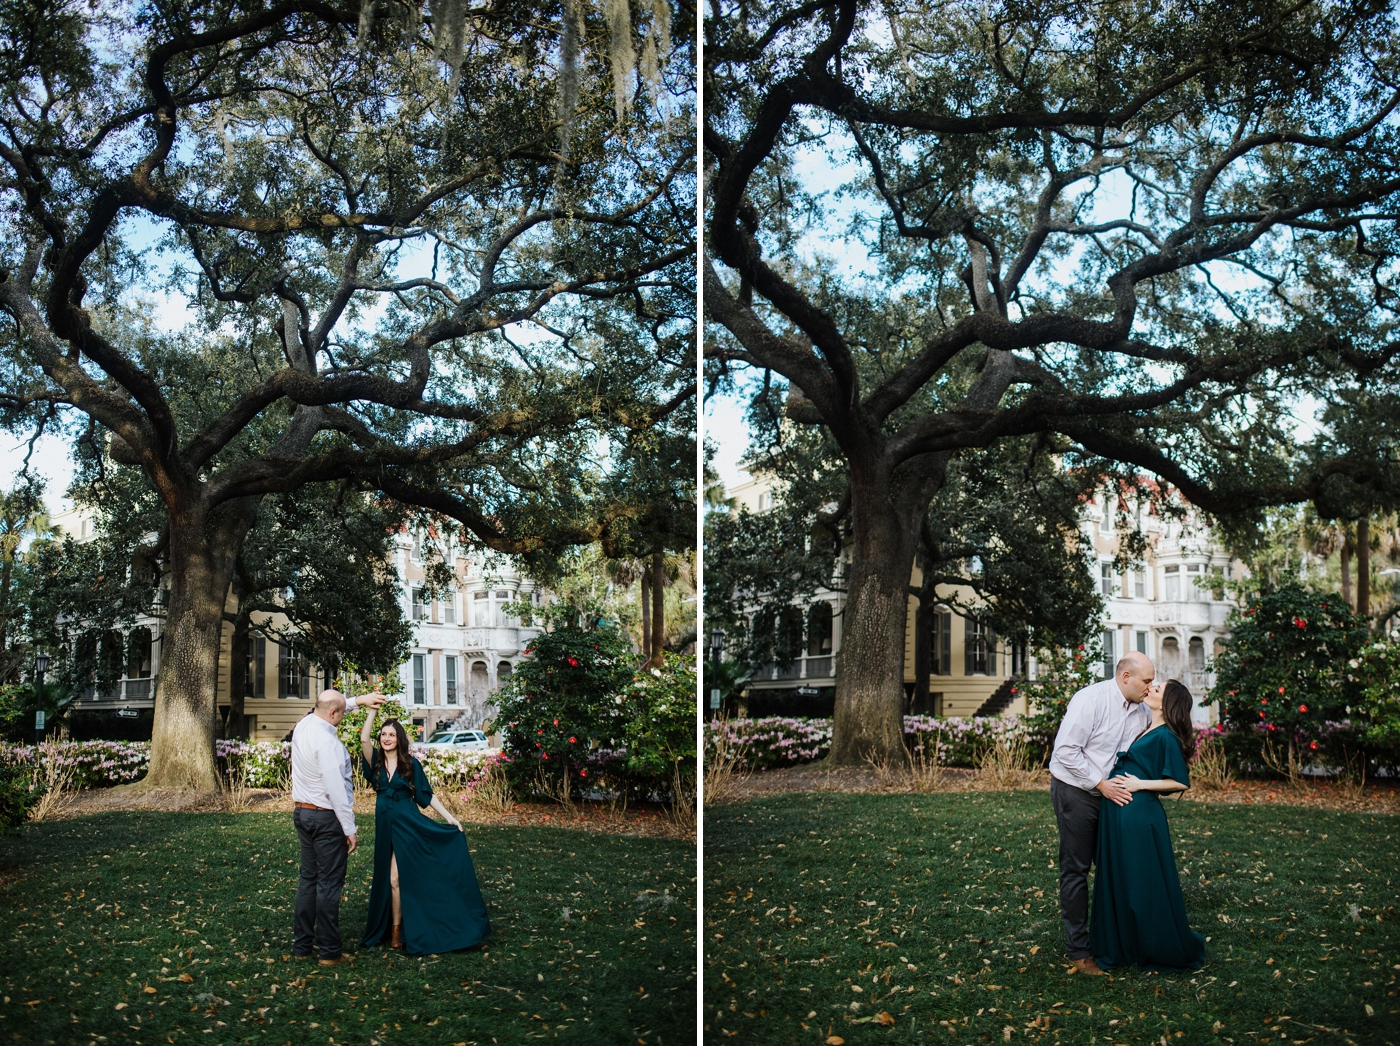 Marianne and Michael’s maternity session in Downtown Savannah